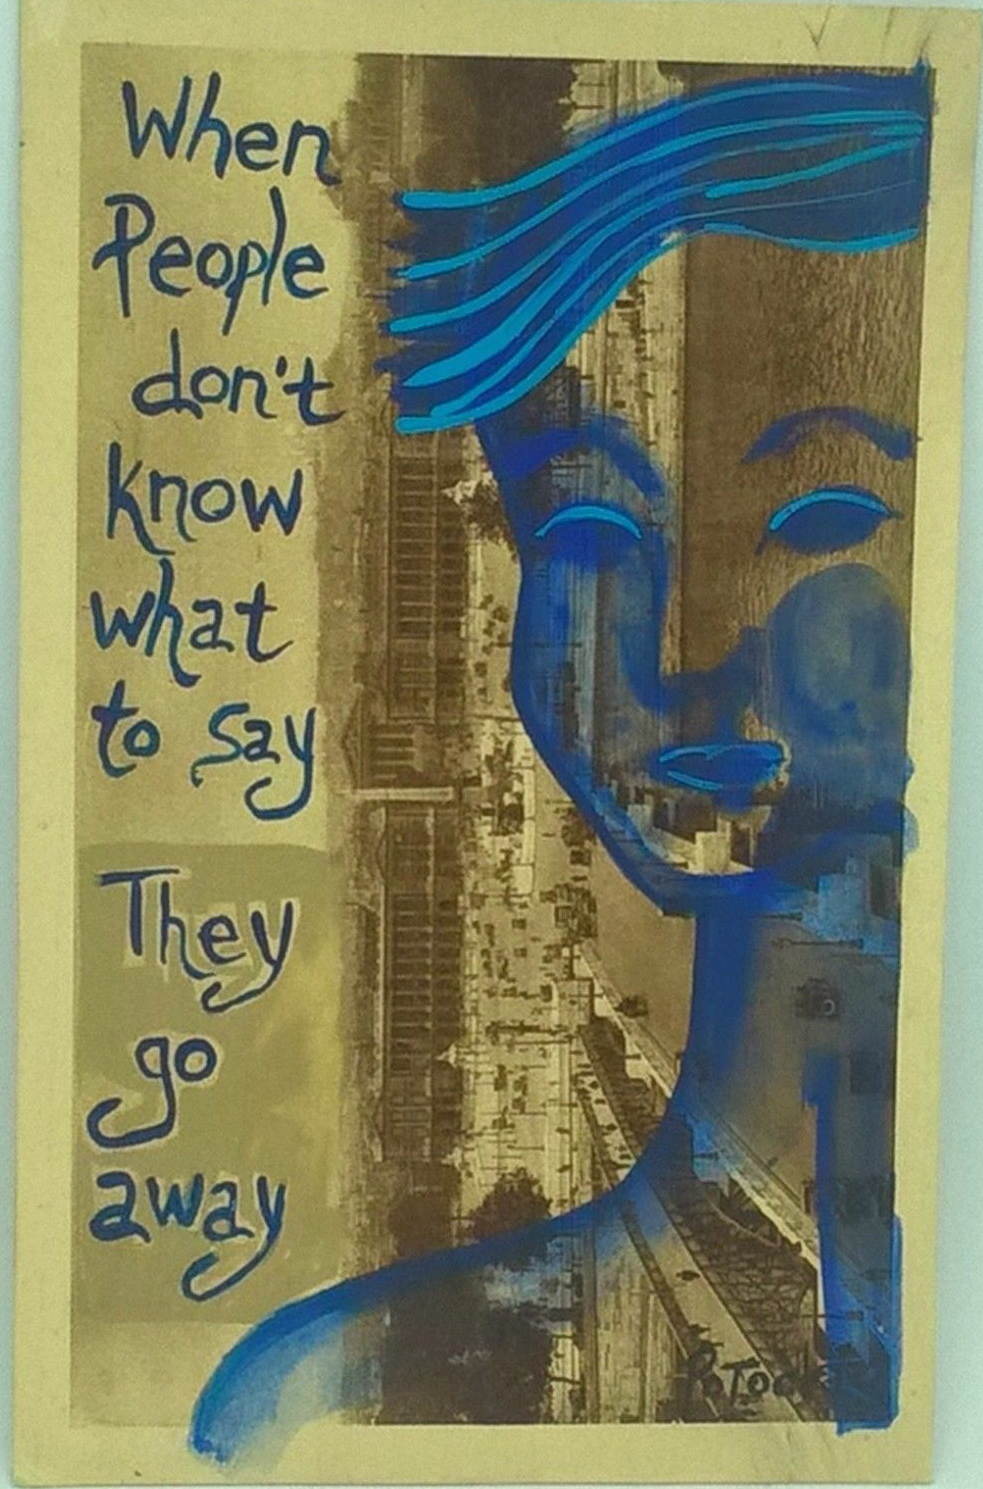 When People Don’t Know What to Say They Go Away acrylic painting on vintage postcard